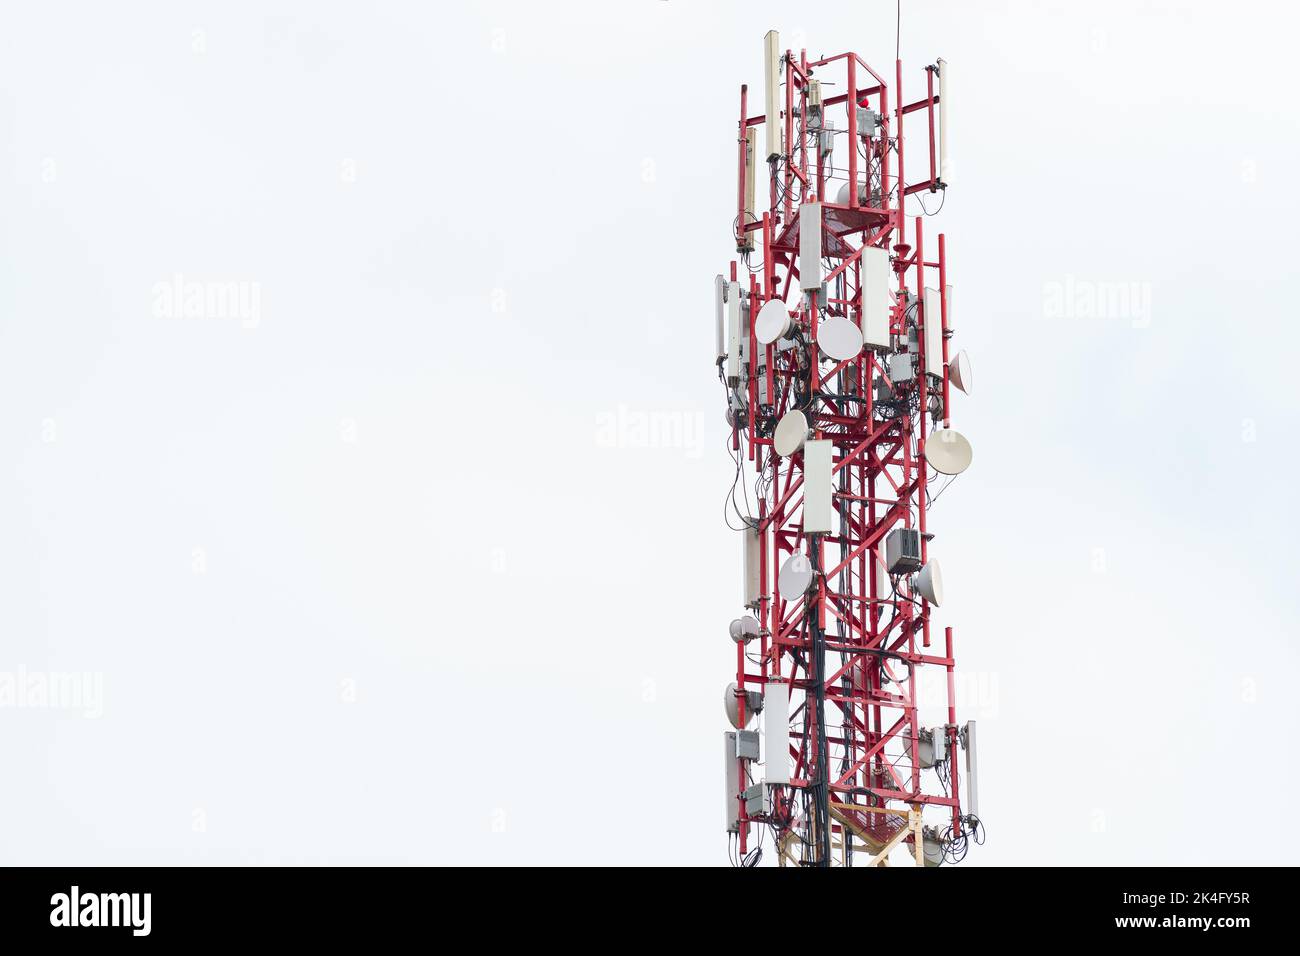 upper part of the radio tower with installed antennas and other equipment against a white cloudy sky Stock Photo